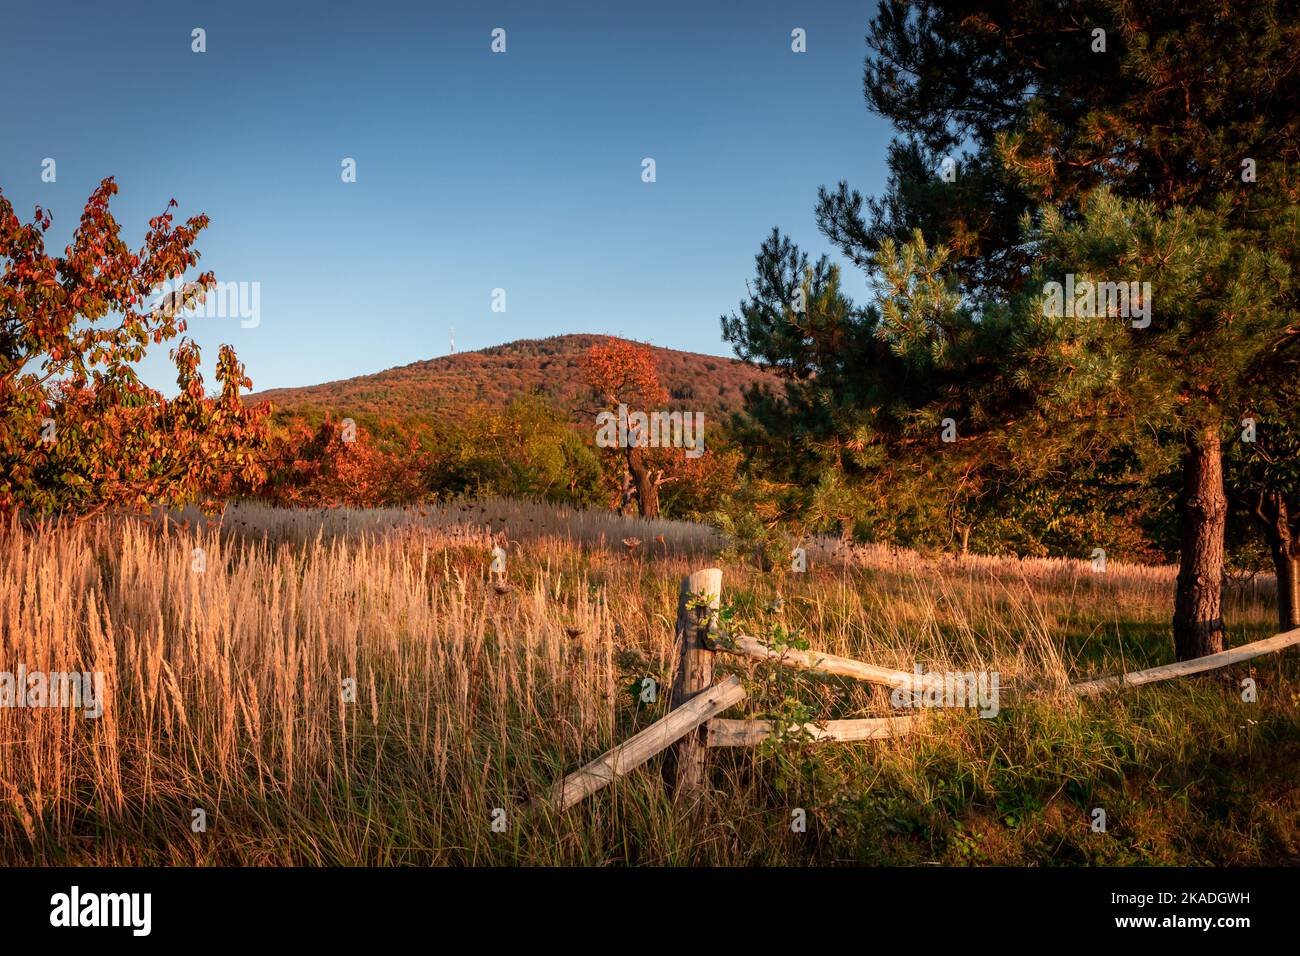 Autumnal sunset landscape with Sleza Mountain, Poland. Old broken wooden fence in foreground. Stock Photo